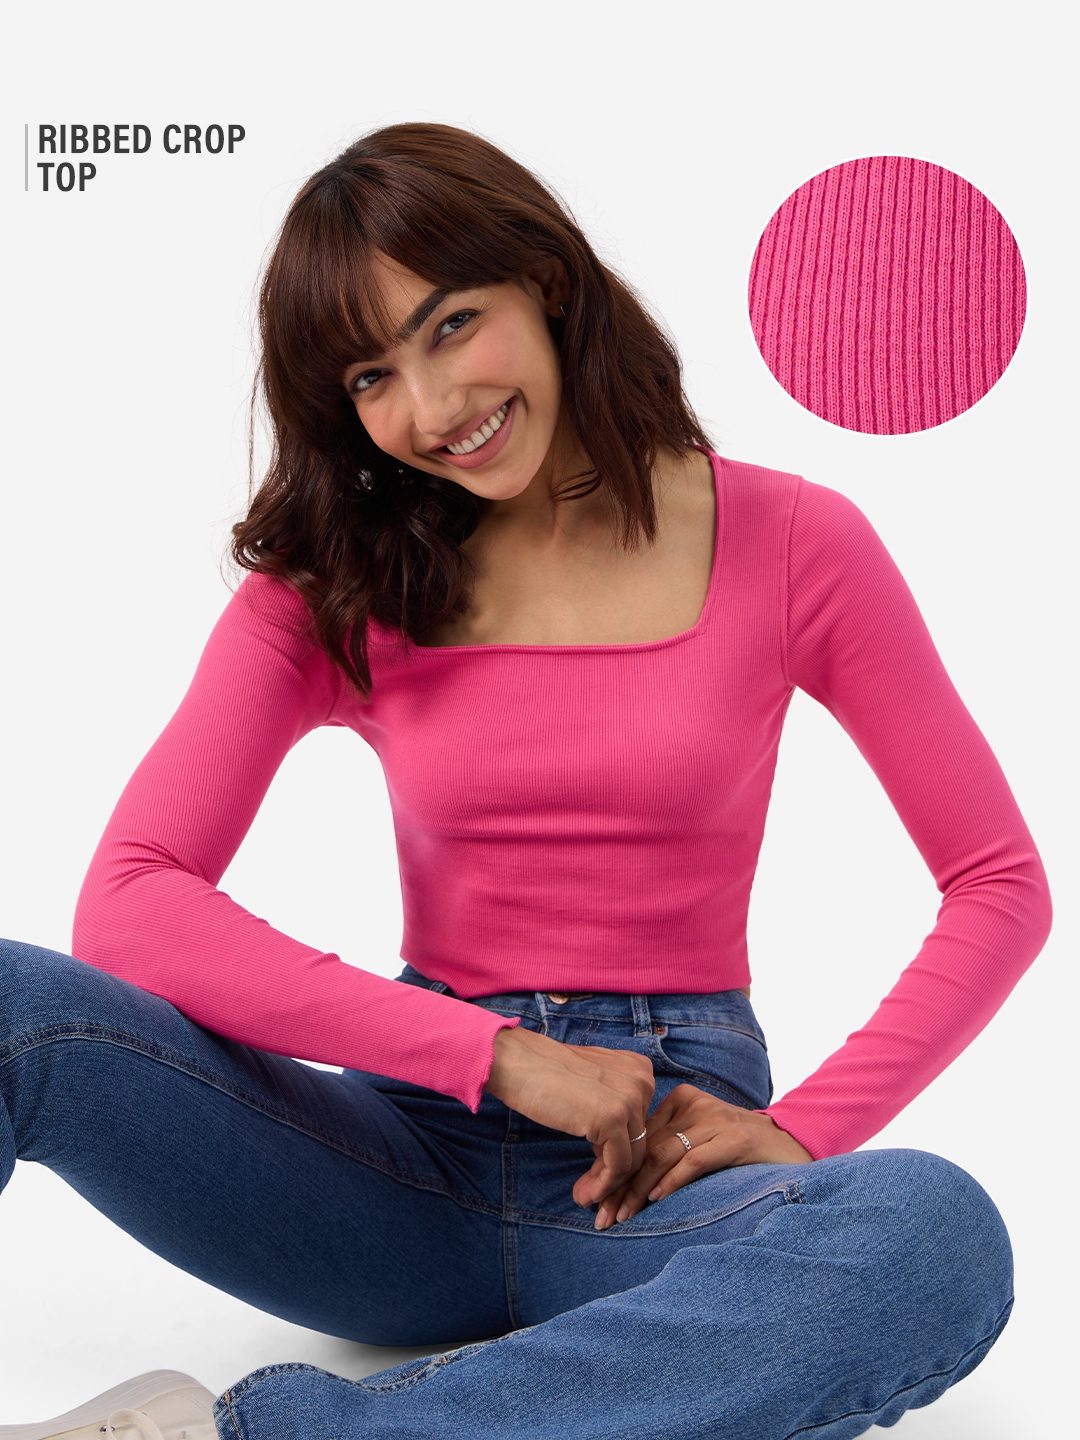 Women's Hot-Pink Ribbed Top Women's Full Sleeves Tops